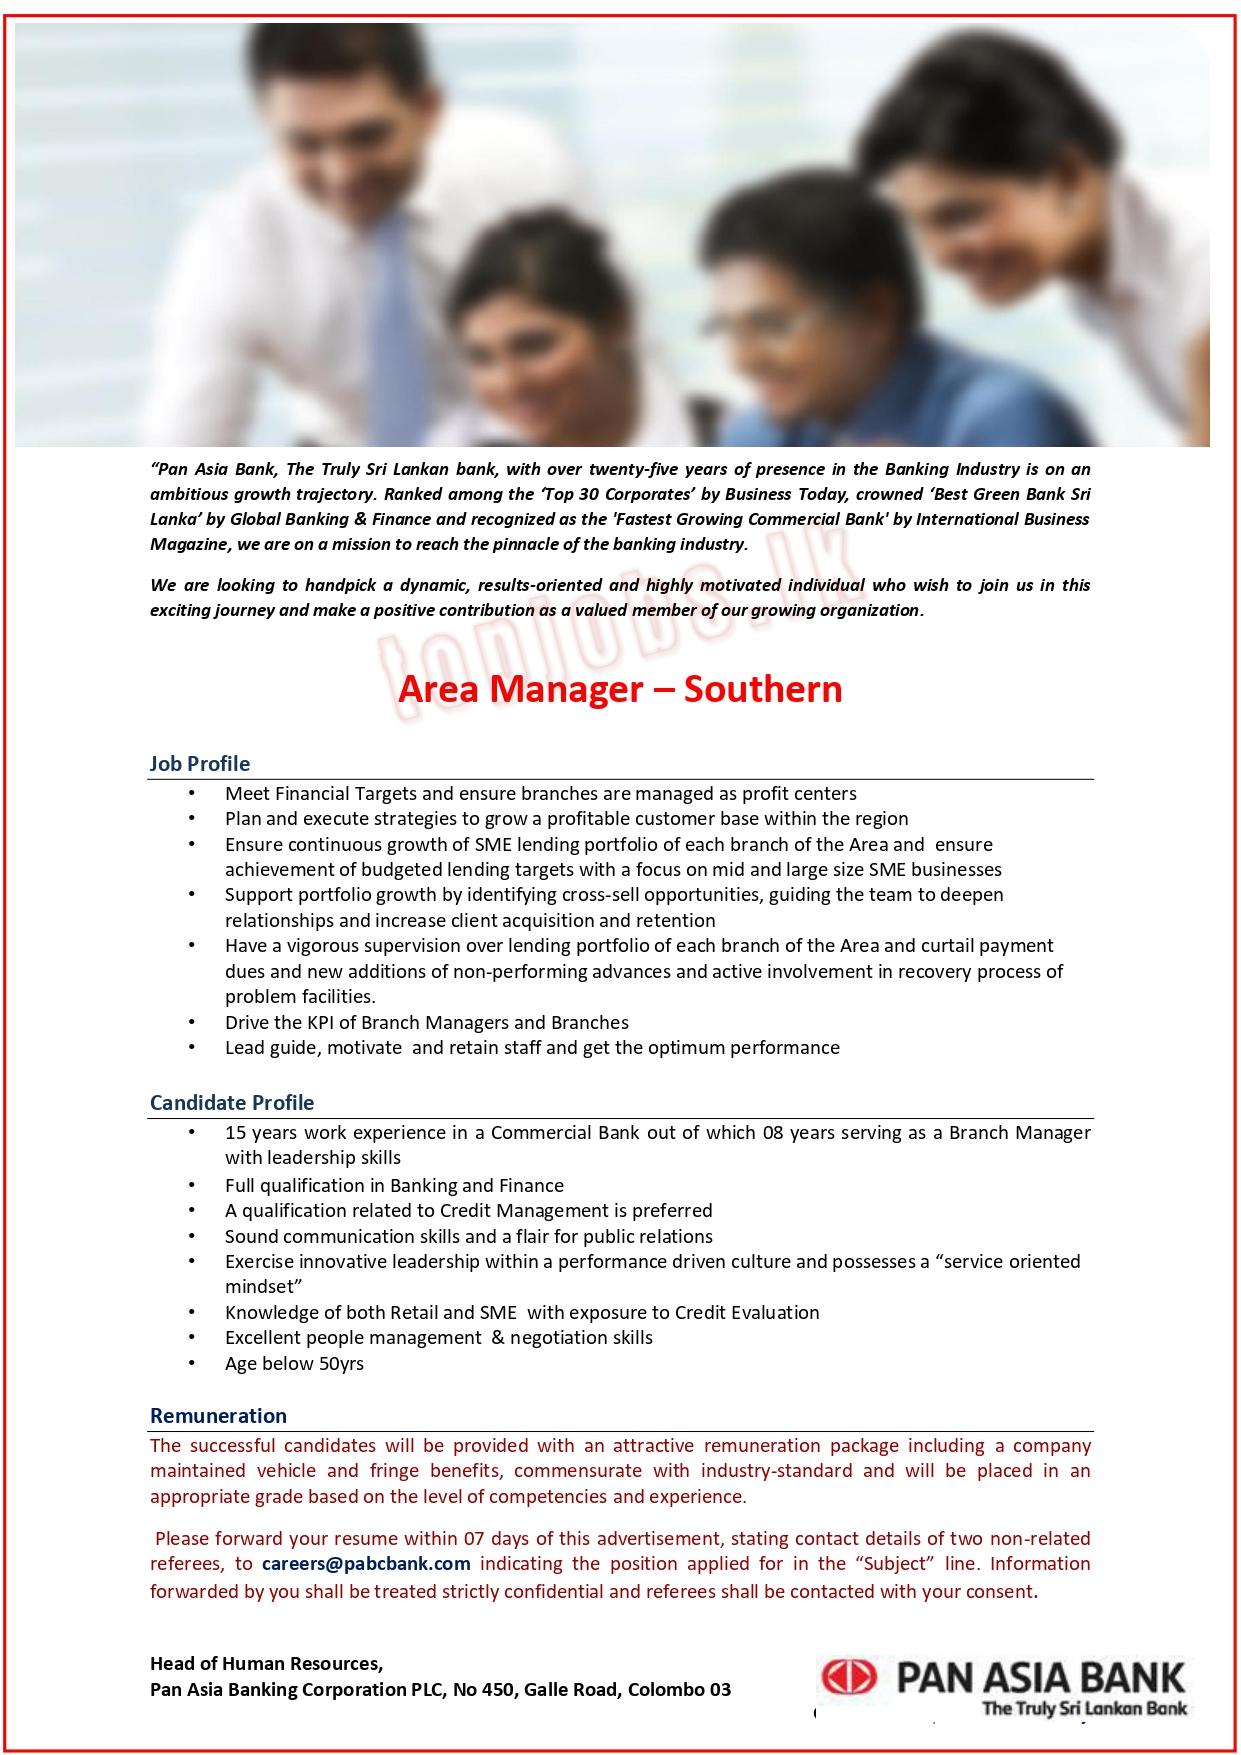 Area Manager of Southern Province Vacancies in Pan Asia Bank